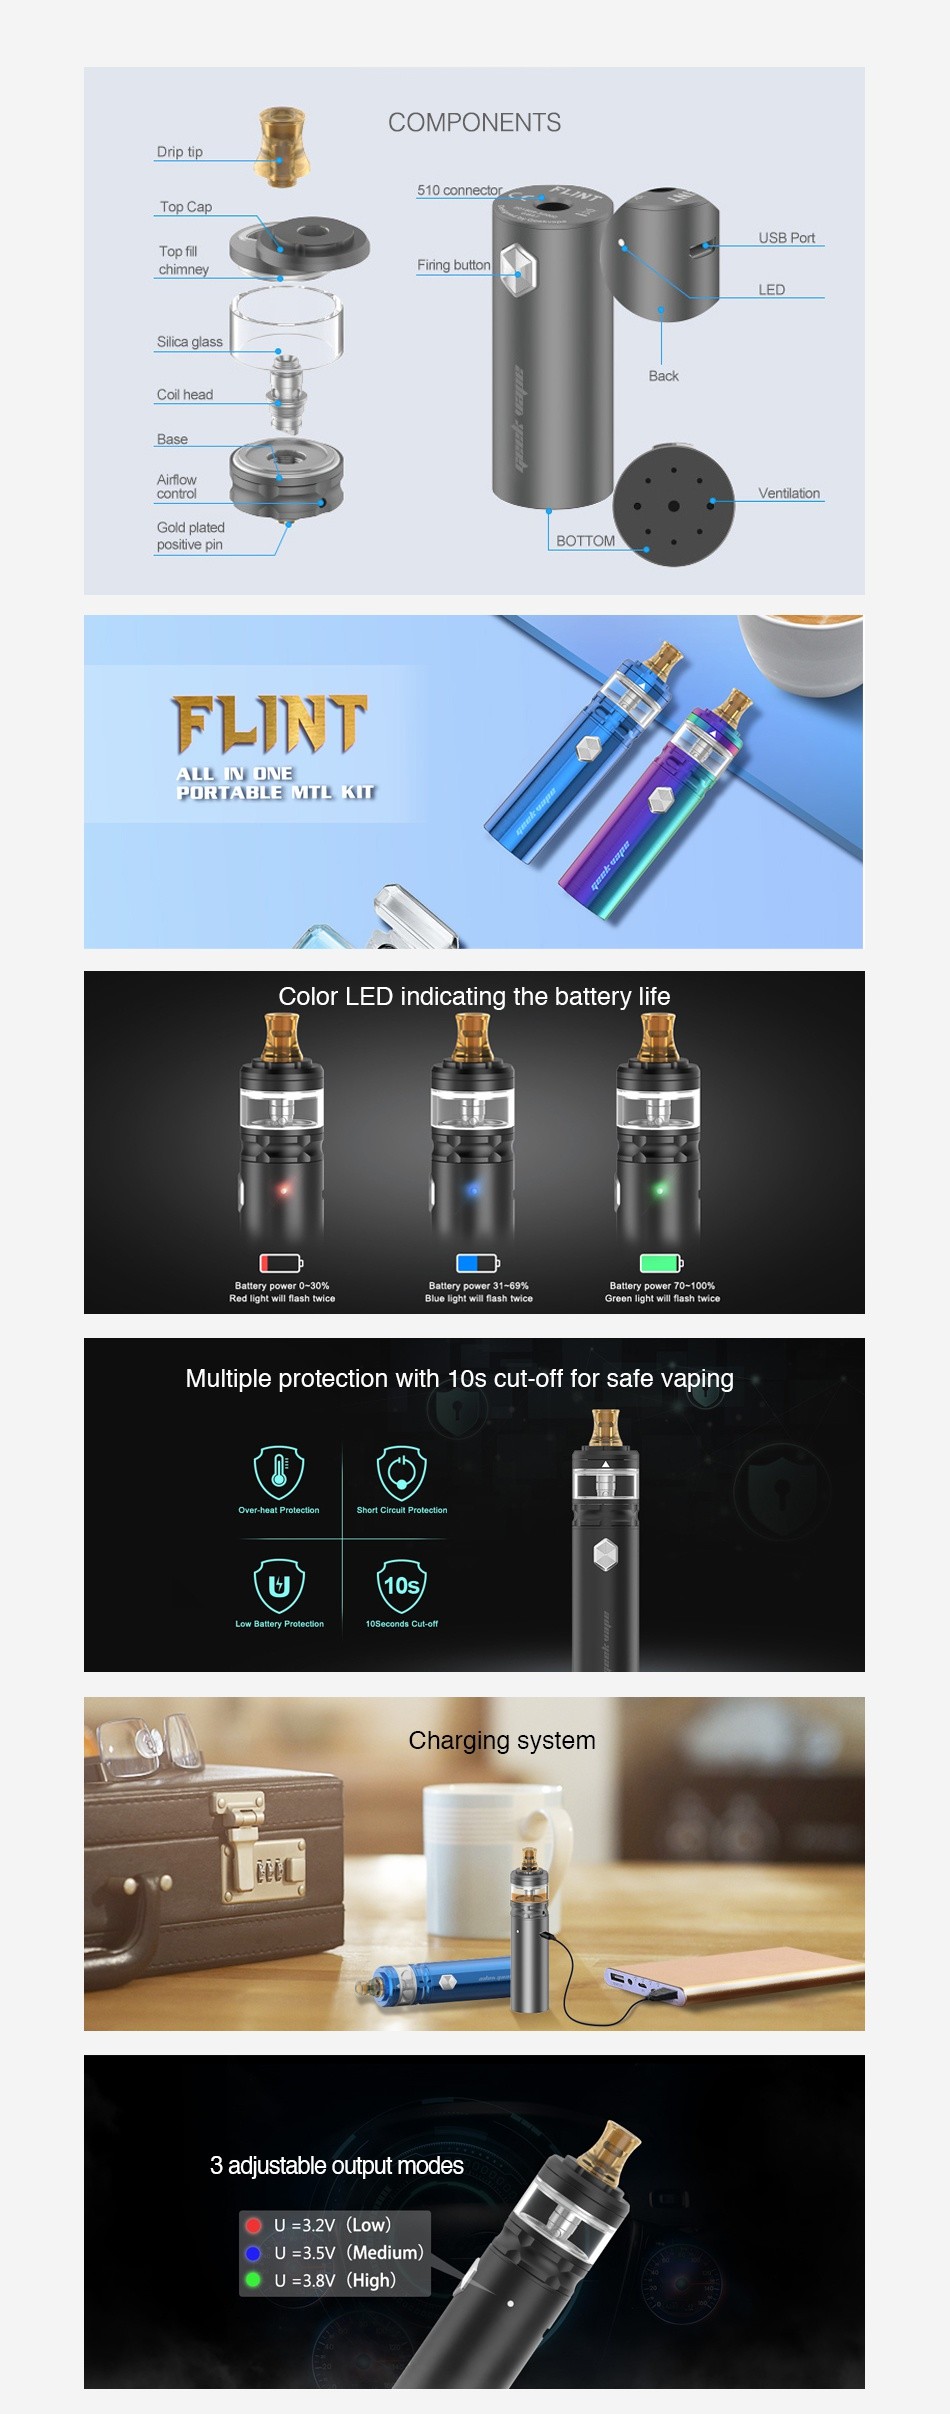 Geekvape Flint Starter Kit 1000mAh COMPONENTS 510 conne Top Ca chimney Firing button Coil rcad Base Airflow control God plated Cs  FLINT YLL IN ONE ORTABLE MTL KIT Color LEd indicating the battery life Multiple protection with 10s cut off for safe vaping Charging system 3 adjustable output modes O U 3  2V Low   U 35 Medium   U 38V High